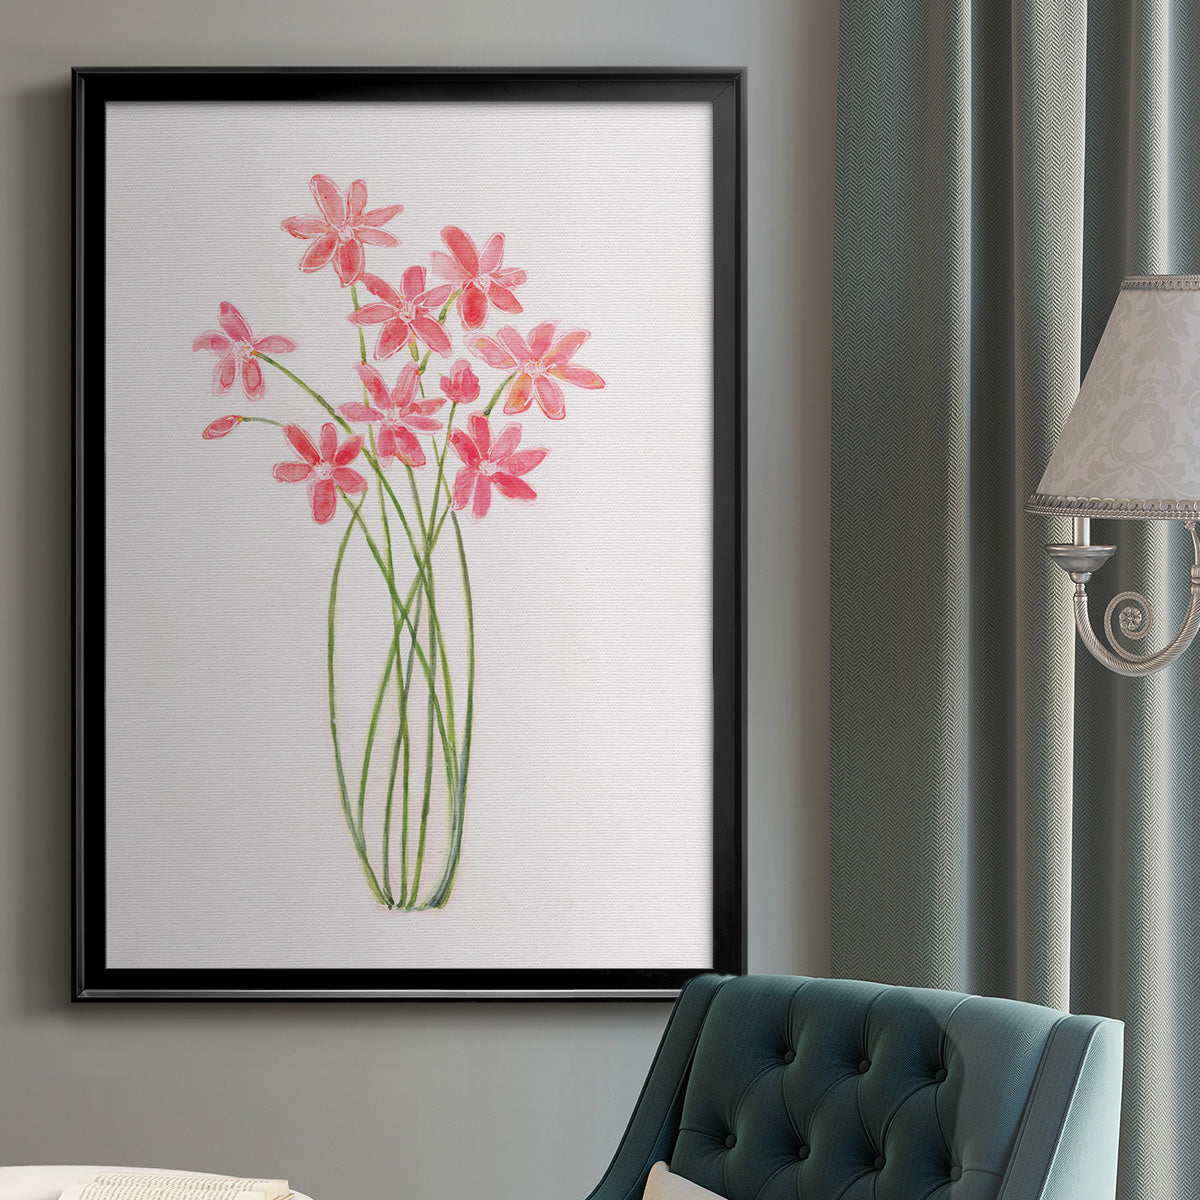 Intertwined Bouquet II Premium Framed Print - Ready to Hang